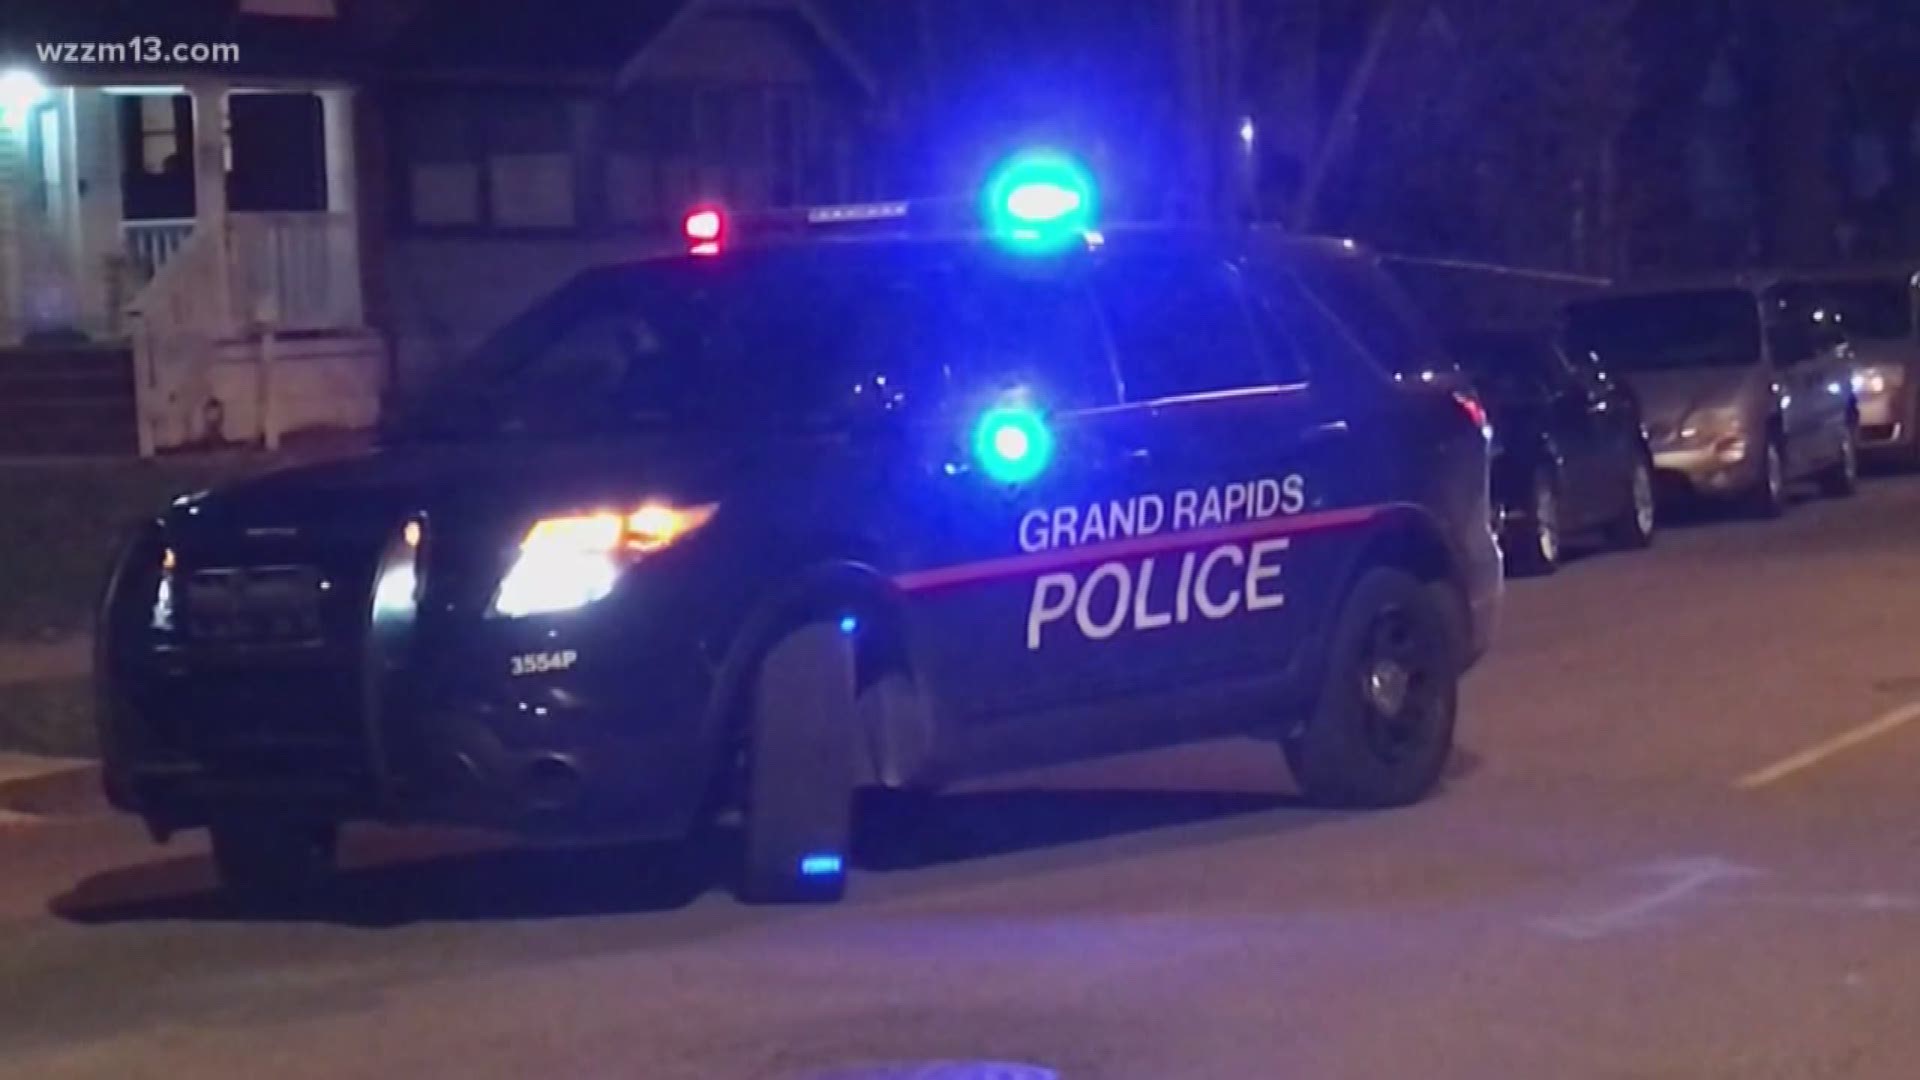 Grand Rapids Police say one person has been killed and one injured in a shooting on the southeast side of the city.